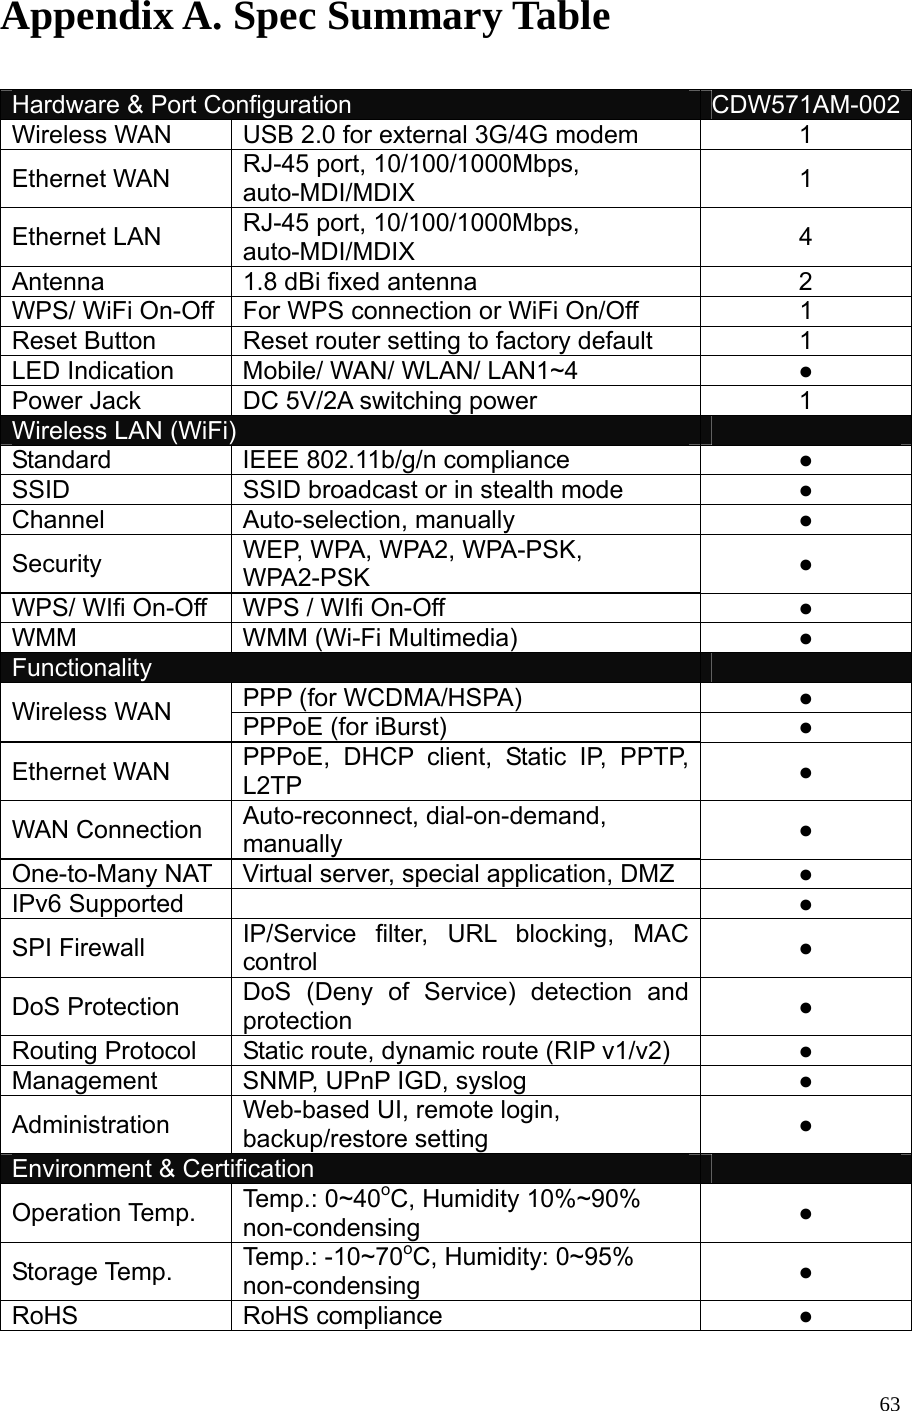  63Appendix A. Spec Summary Table   Hardware &amp; Port Configuration  CDW571AM-002Wireless WAN  USB 2.0 for external 3G/4G modem  1 Ethernet WAN  RJ-45 port, 10/100/1000Mbps, auto-MDI/MDIX  1 Ethernet LAN  RJ-45 port, 10/100/1000Mbps, auto-MDI/MDIX  4 Antenna  1.8 dBi fixed antenna  2 WPS/ WiFi On-Off  For WPS connection or WiFi On/Off  1 Reset Button  Reset router setting to factory default  1 LED Indication  Mobile/ WAN/ WLAN/ LAN1~4  ● Power Jack  DC 5V/2A switching power  1 Wireless LAN (WiFi)   Standard  IEEE 802.11b/g/n compliance  ● SSID  SSID broadcast or in stealth mode  ● Channel Auto-selection, manually  ● Security  WEP, WPA, WPA2, WPA-PSK, WPA2-PSK  ● WPS/ WIfi On-Off  WPS / WIfi On-Off  ● WMM WMM (Wi-Fi Multimedia)  ● Functionality   PPP (for WCDMA/HSPA)  ● Wireless WAN  PPPoE (for iBurst)  ● Ethernet WAN  PPPoE, DHCP client, Static IP, PPTP, L2TP  ● WAN Connection  Auto-reconnect, dial-on-demand, manually  ● One-to-Many NAT  Virtual server, special application, DMZ  ● IPv6 Supported    ● SPI Firewall  IP/Service filter, URL blocking, MAC control  ● DoS Protection  DoS (Deny of Service) detection and protection  ● Routing Protocol    Static route, dynamic route (RIP v1/v2)  ● Management  SNMP, UPnP IGD, syslog  ● Administration  Web-based UI, remote login, backup/restore setting  ● Environment &amp; Certification   Operation Temp.  Temp.: 0~40oC, Humidity 10%~90% non-condensing  ● Storage Temp.  Temp.: -10~70oC, Humidity: 0~95% non-condensing  ● RoHS RoHS compliance  ●  